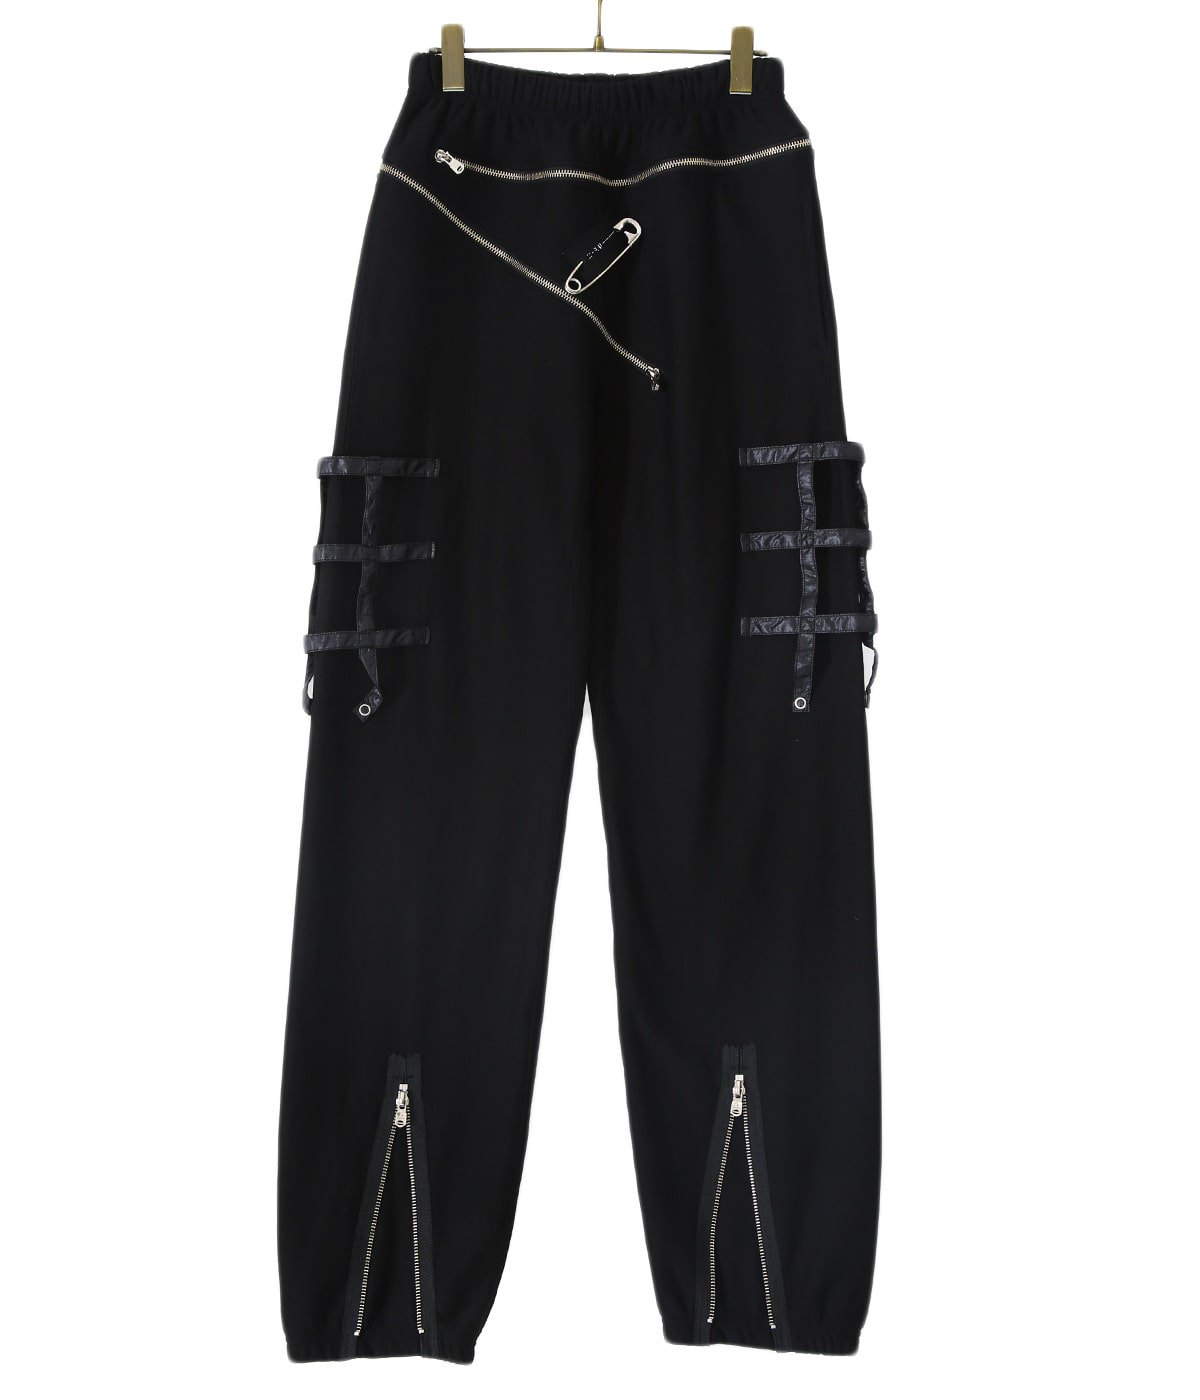 space jogger pant.